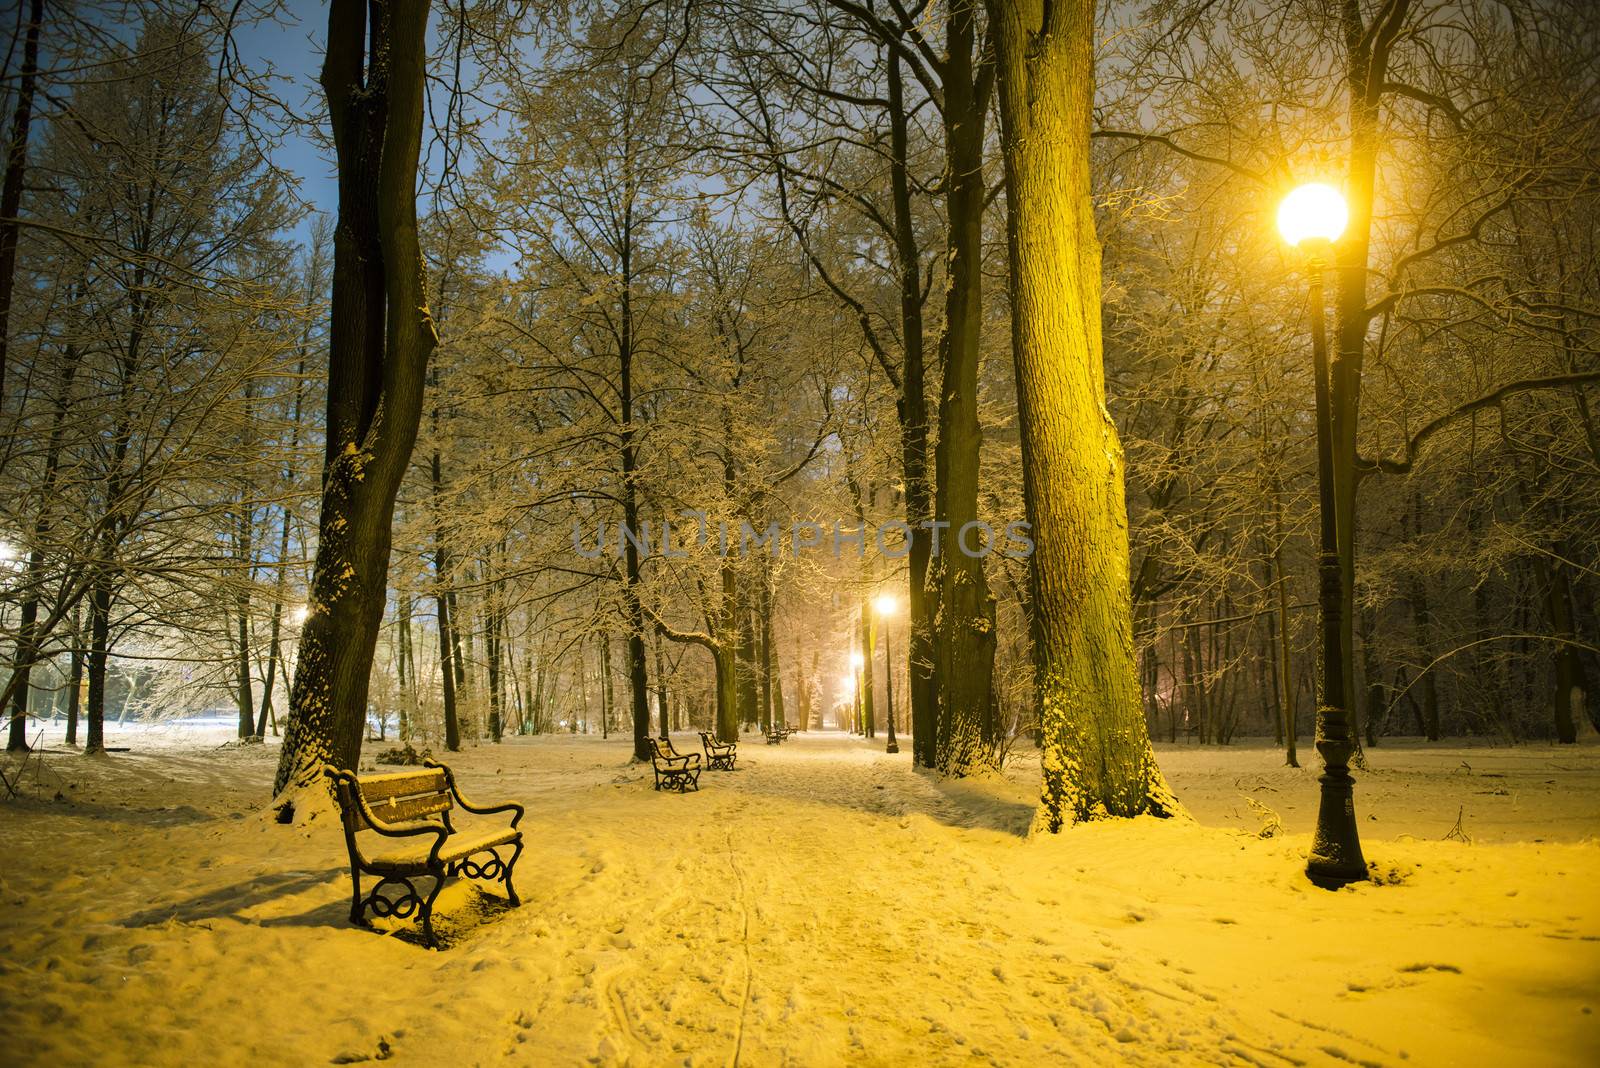 Red bench in the park covered with snow at night